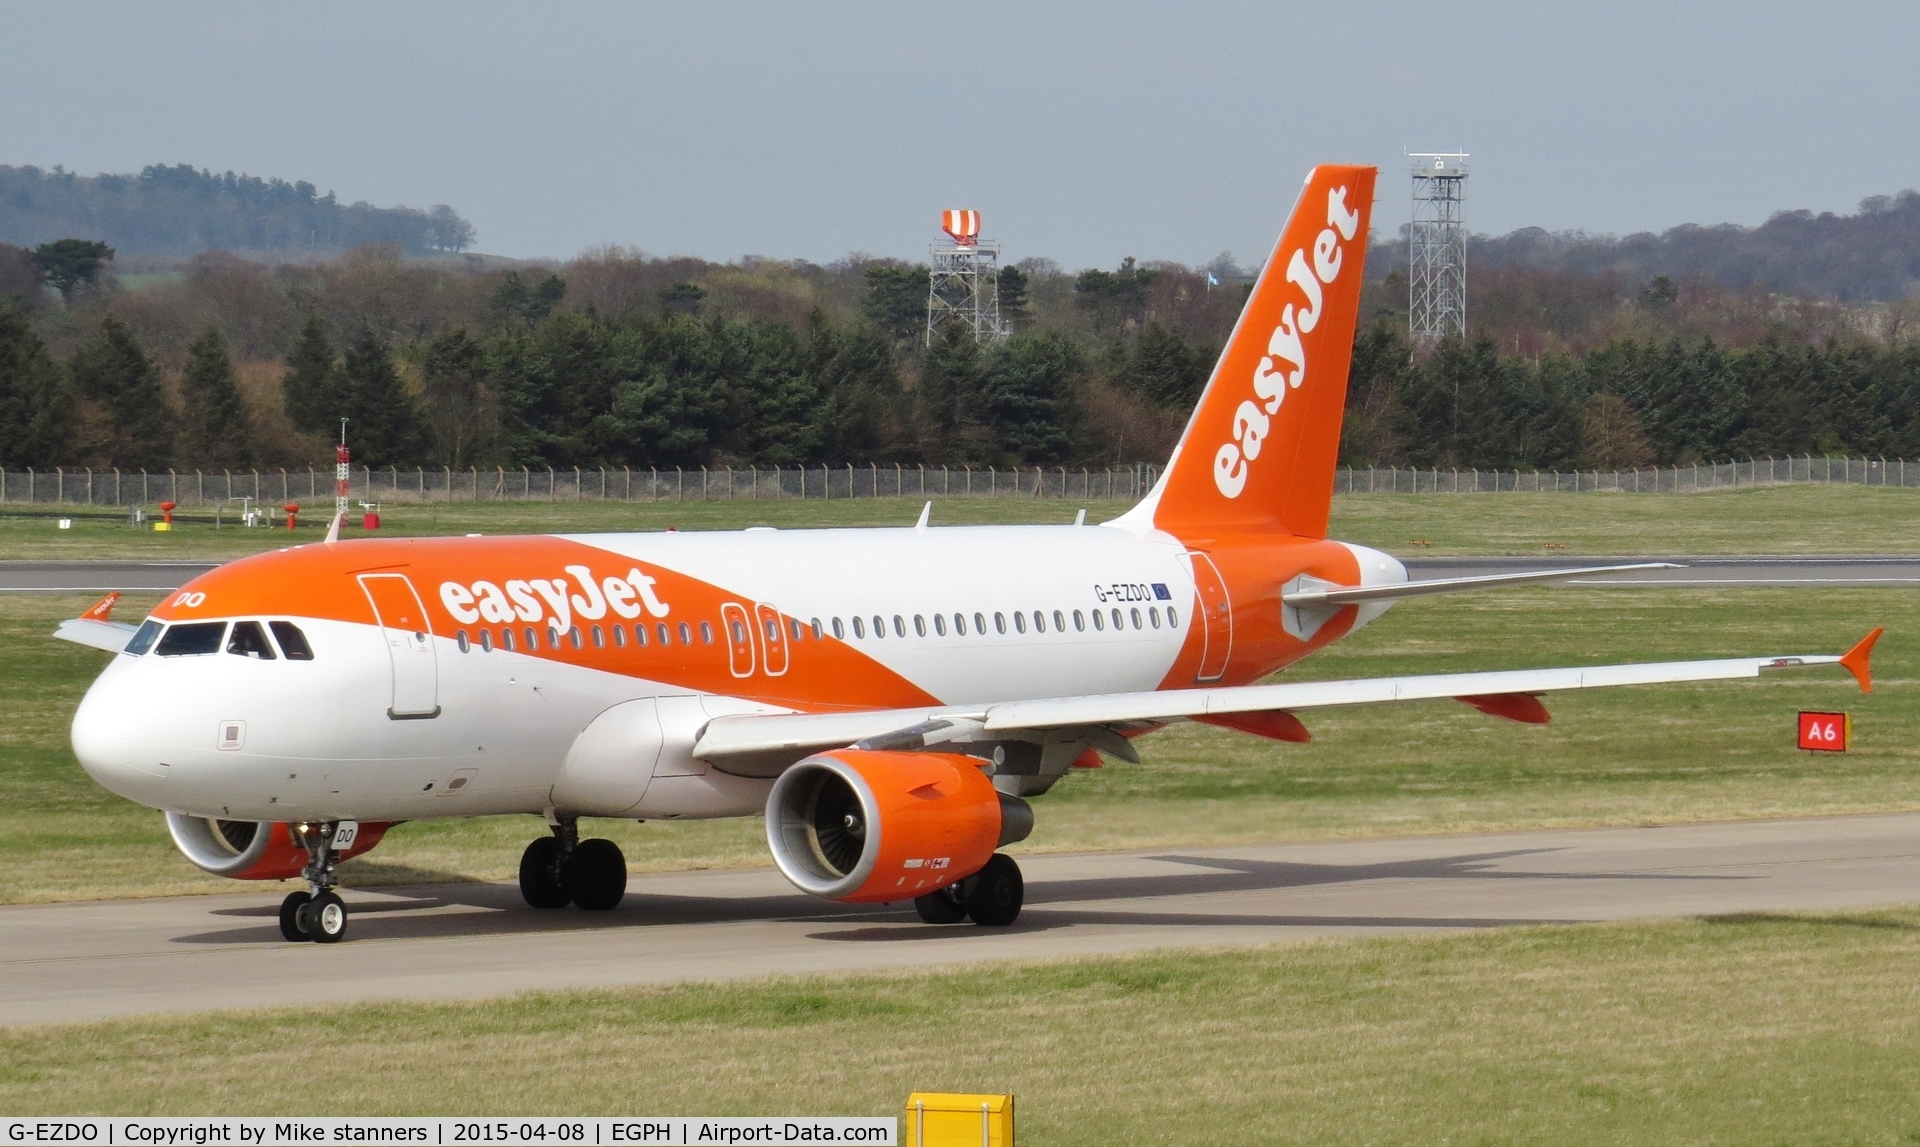 G-EZDO, 2008 Airbus A319-111 C/N 3634, Easyjet A319 In the new colour scheme taxiing to runway 06